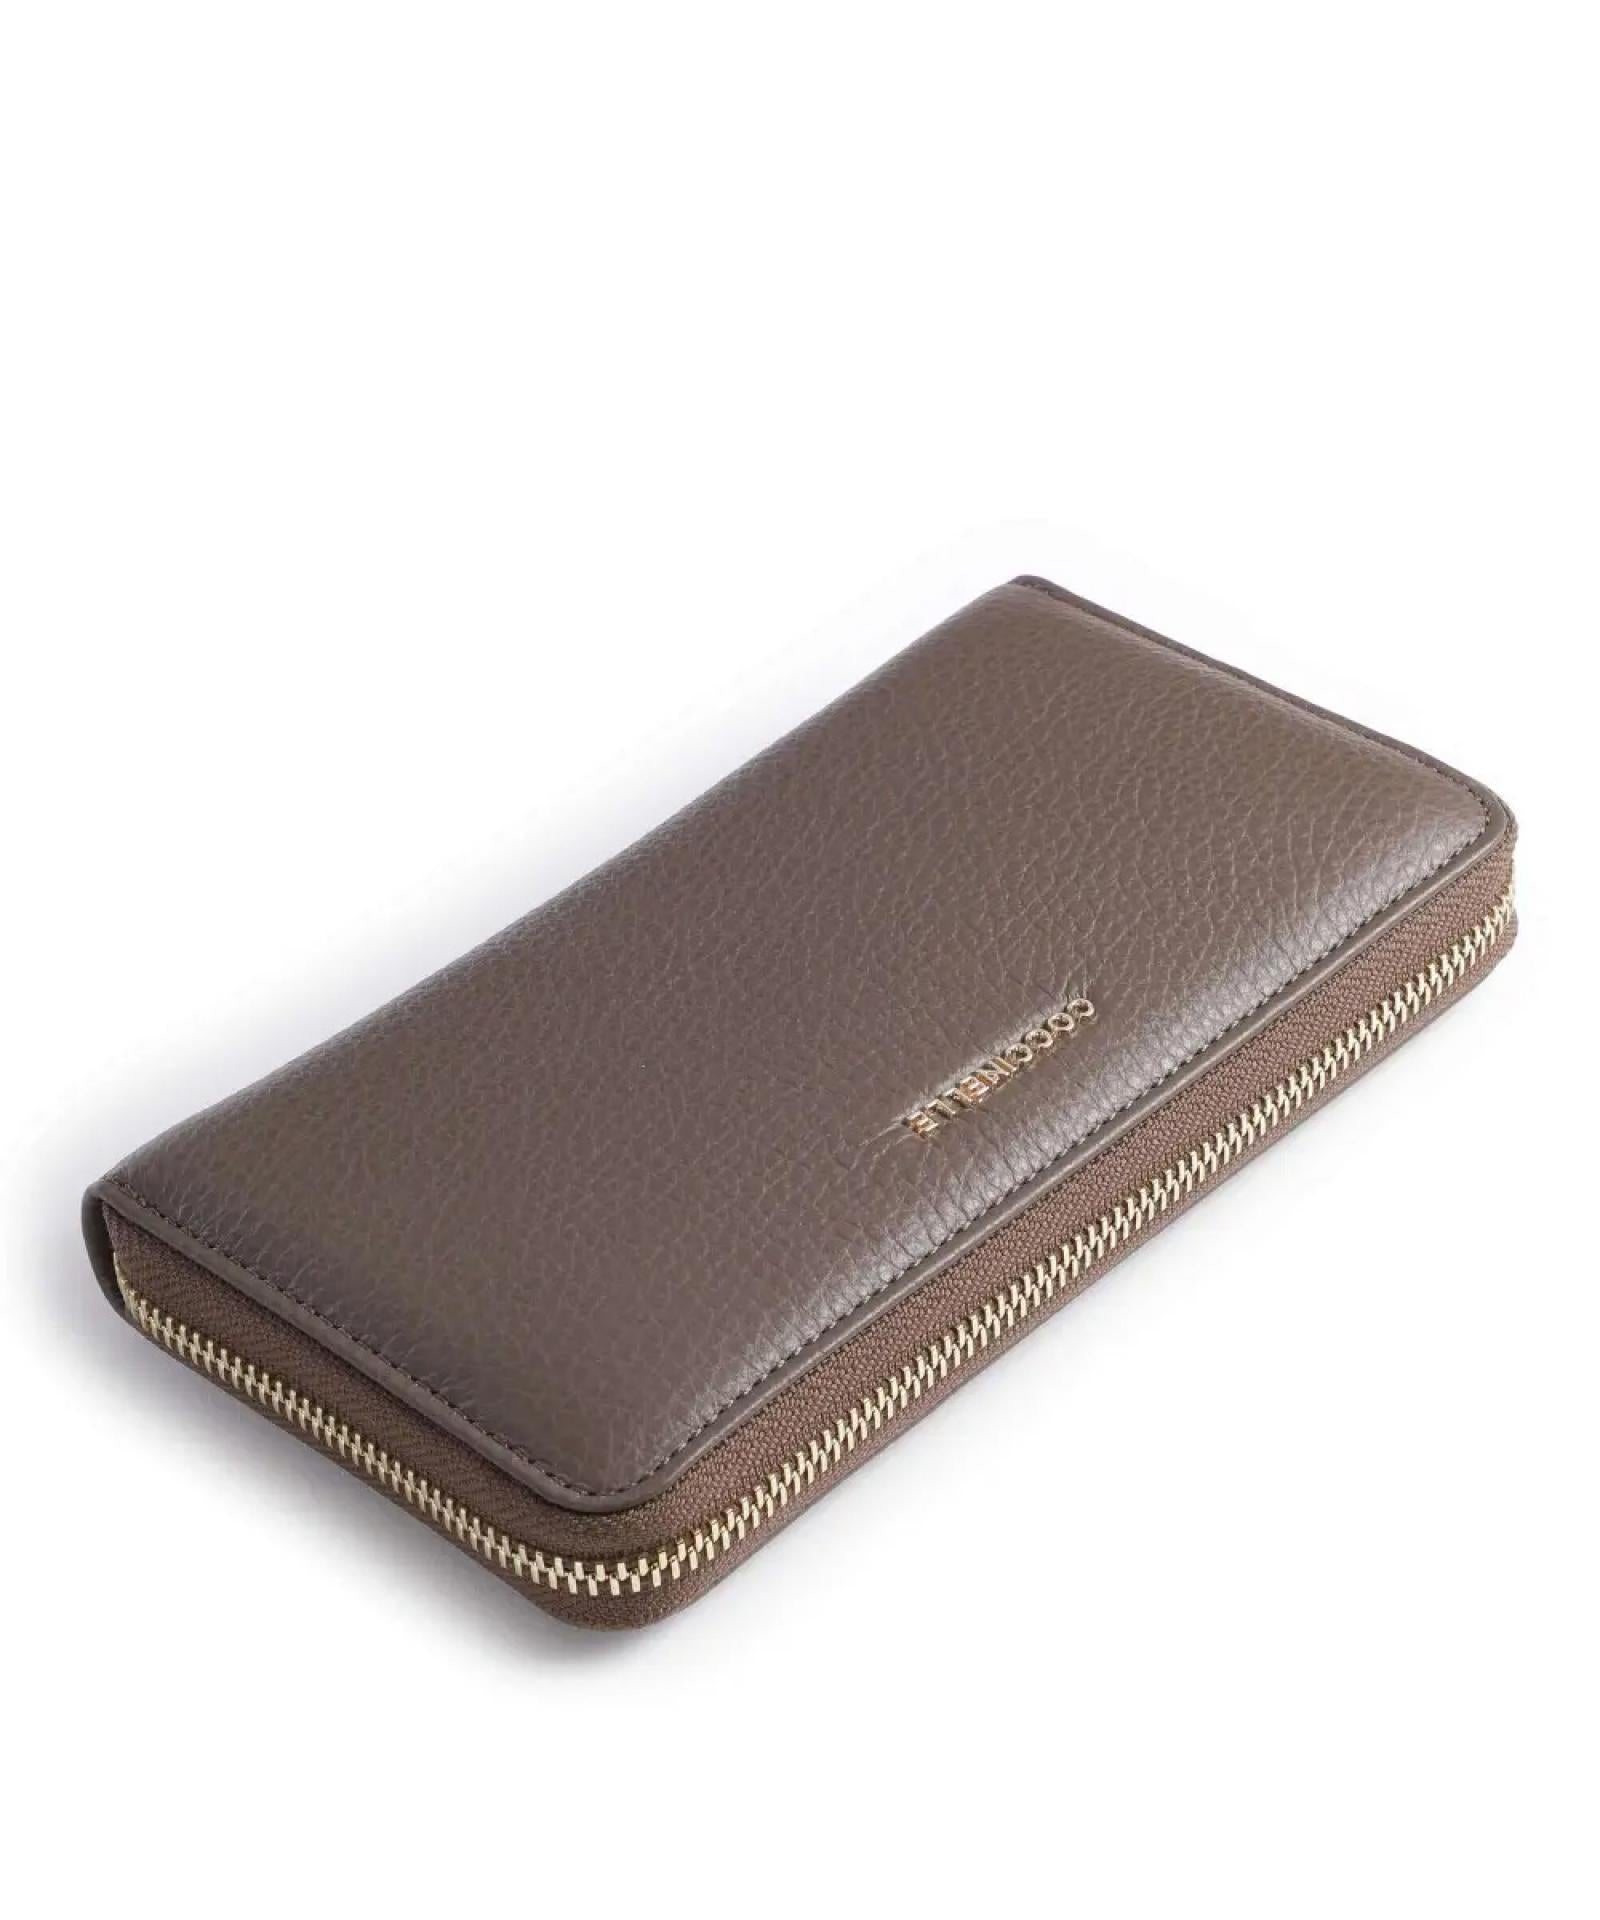 Coccinelle WALLET GRAINED LEATHER / COFFEE